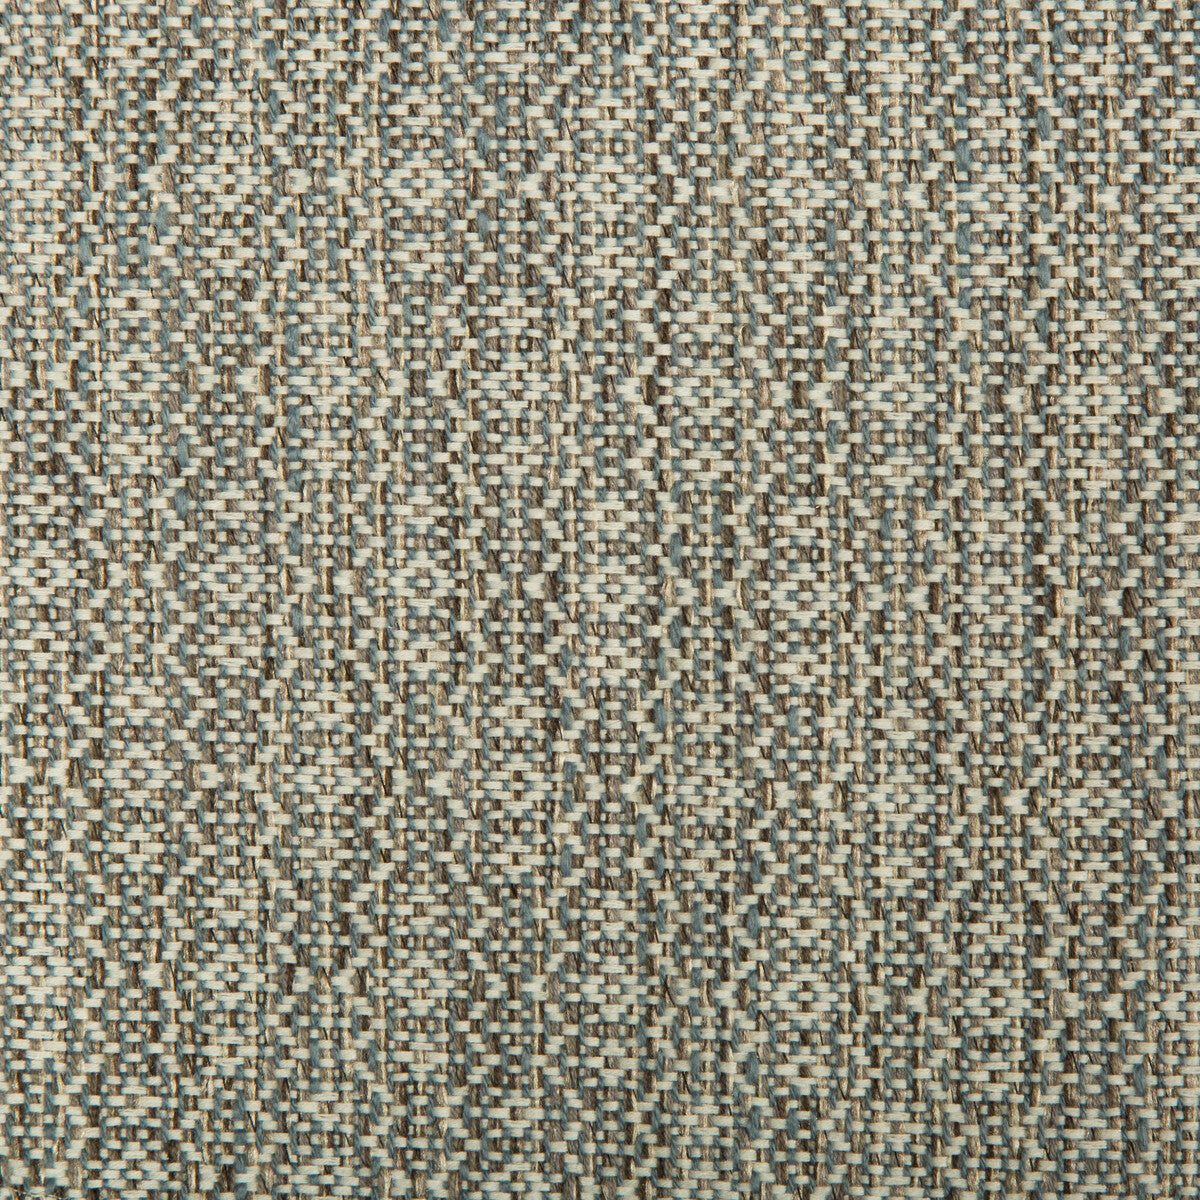 Kravet Smart fabric in 34625-516 color - pattern 34625.516.0 - by Kravet Smart in the Performance Crypton Home collection